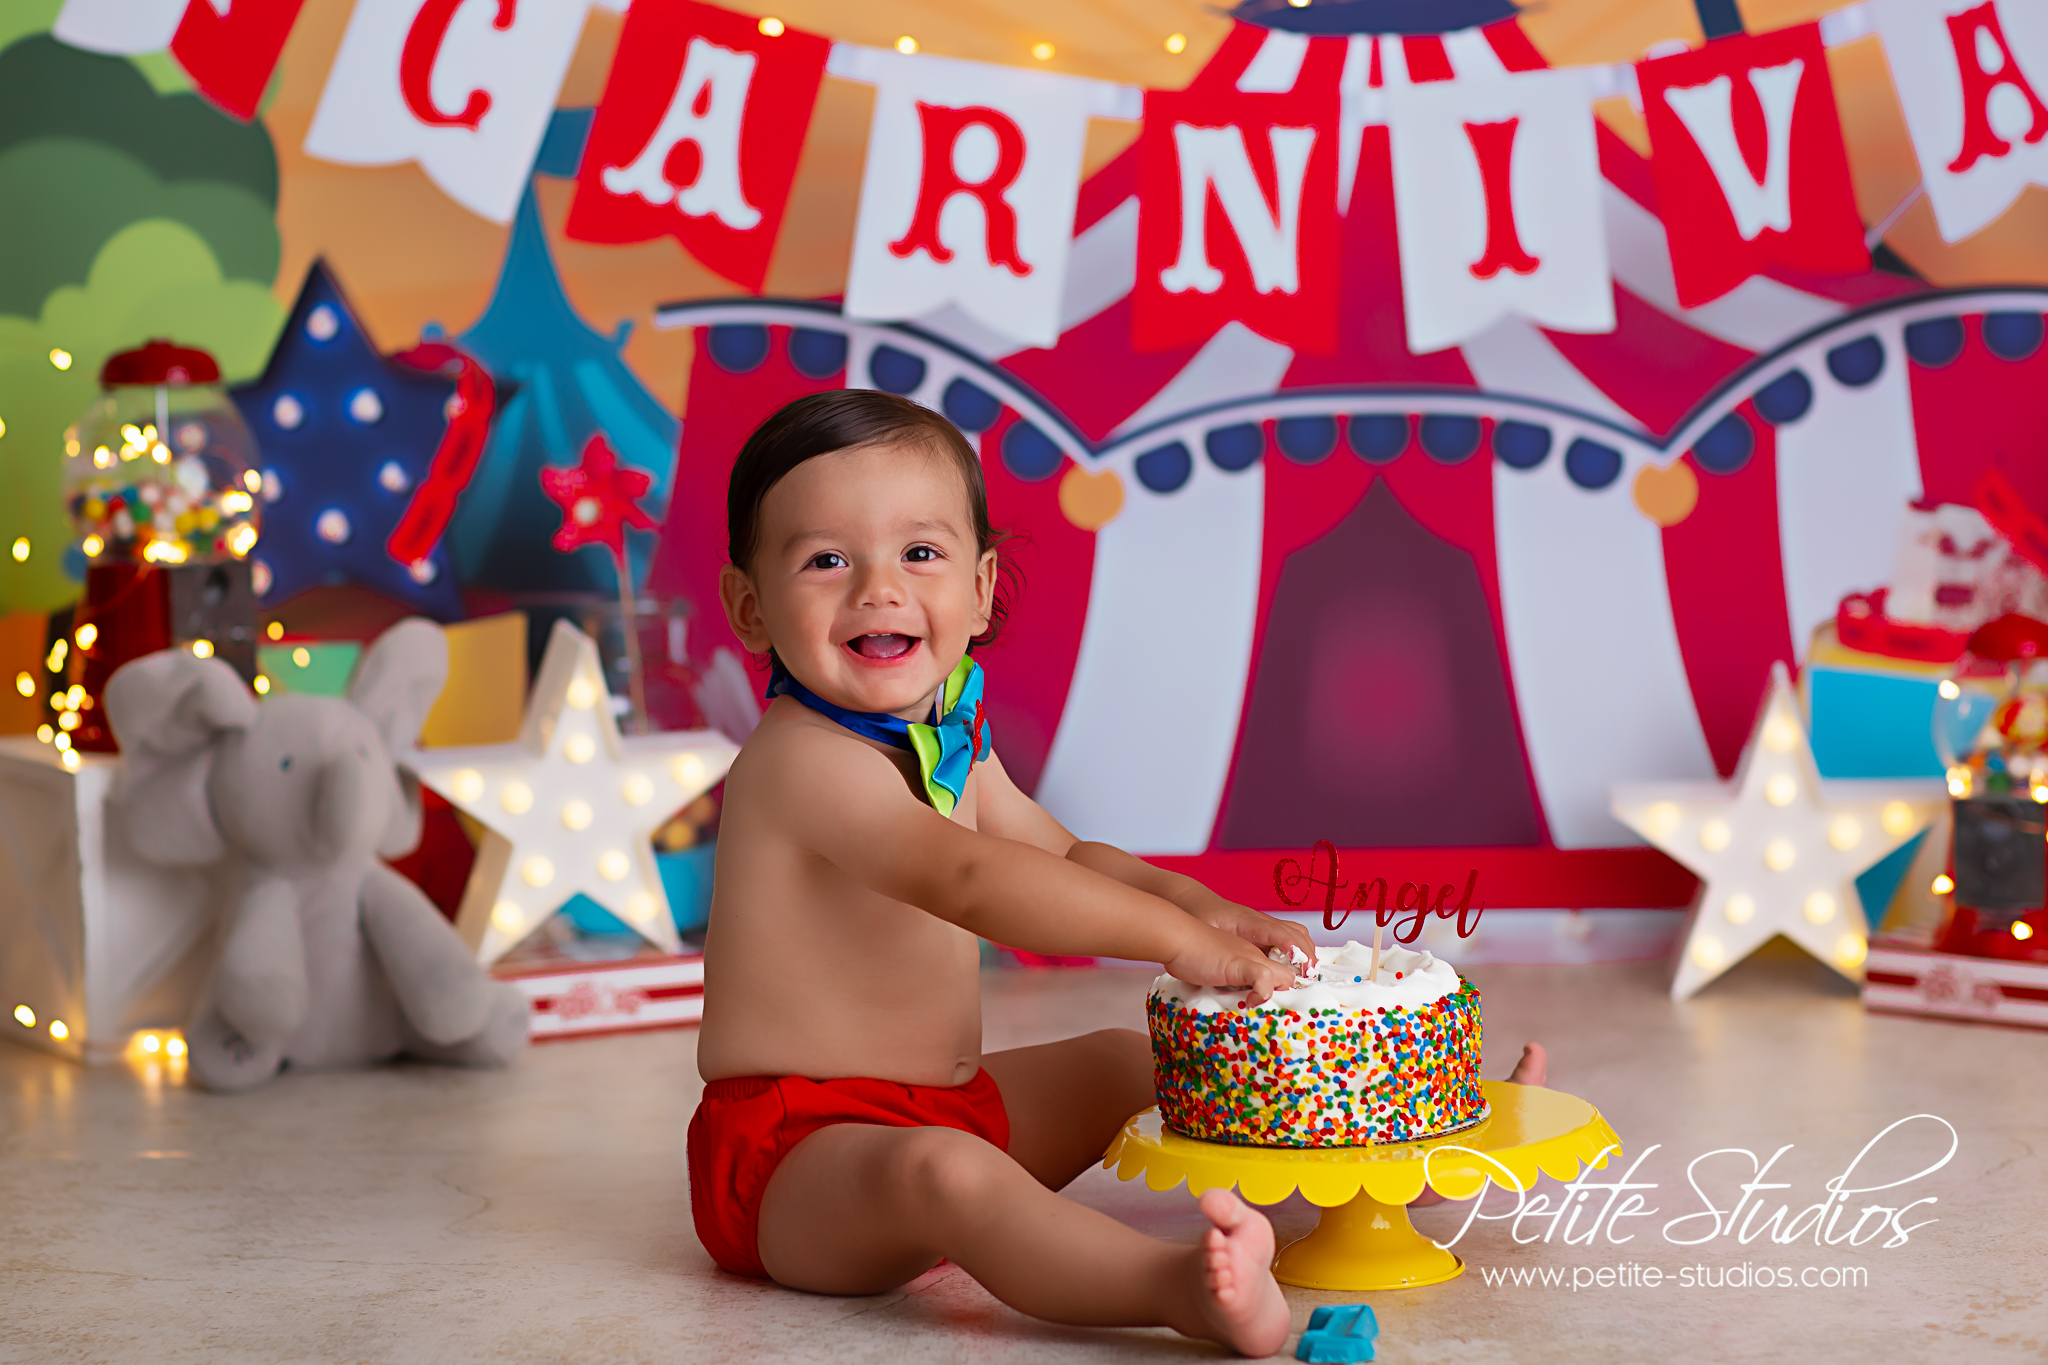 Amazon.com: Halodete Glitter Circus Happy Birthday Cake Topper - Tent Carnival  Themed Cake Decor - Amusement Park Circus Theme Party Supplies Gold :  Grocery & Gourmet Food